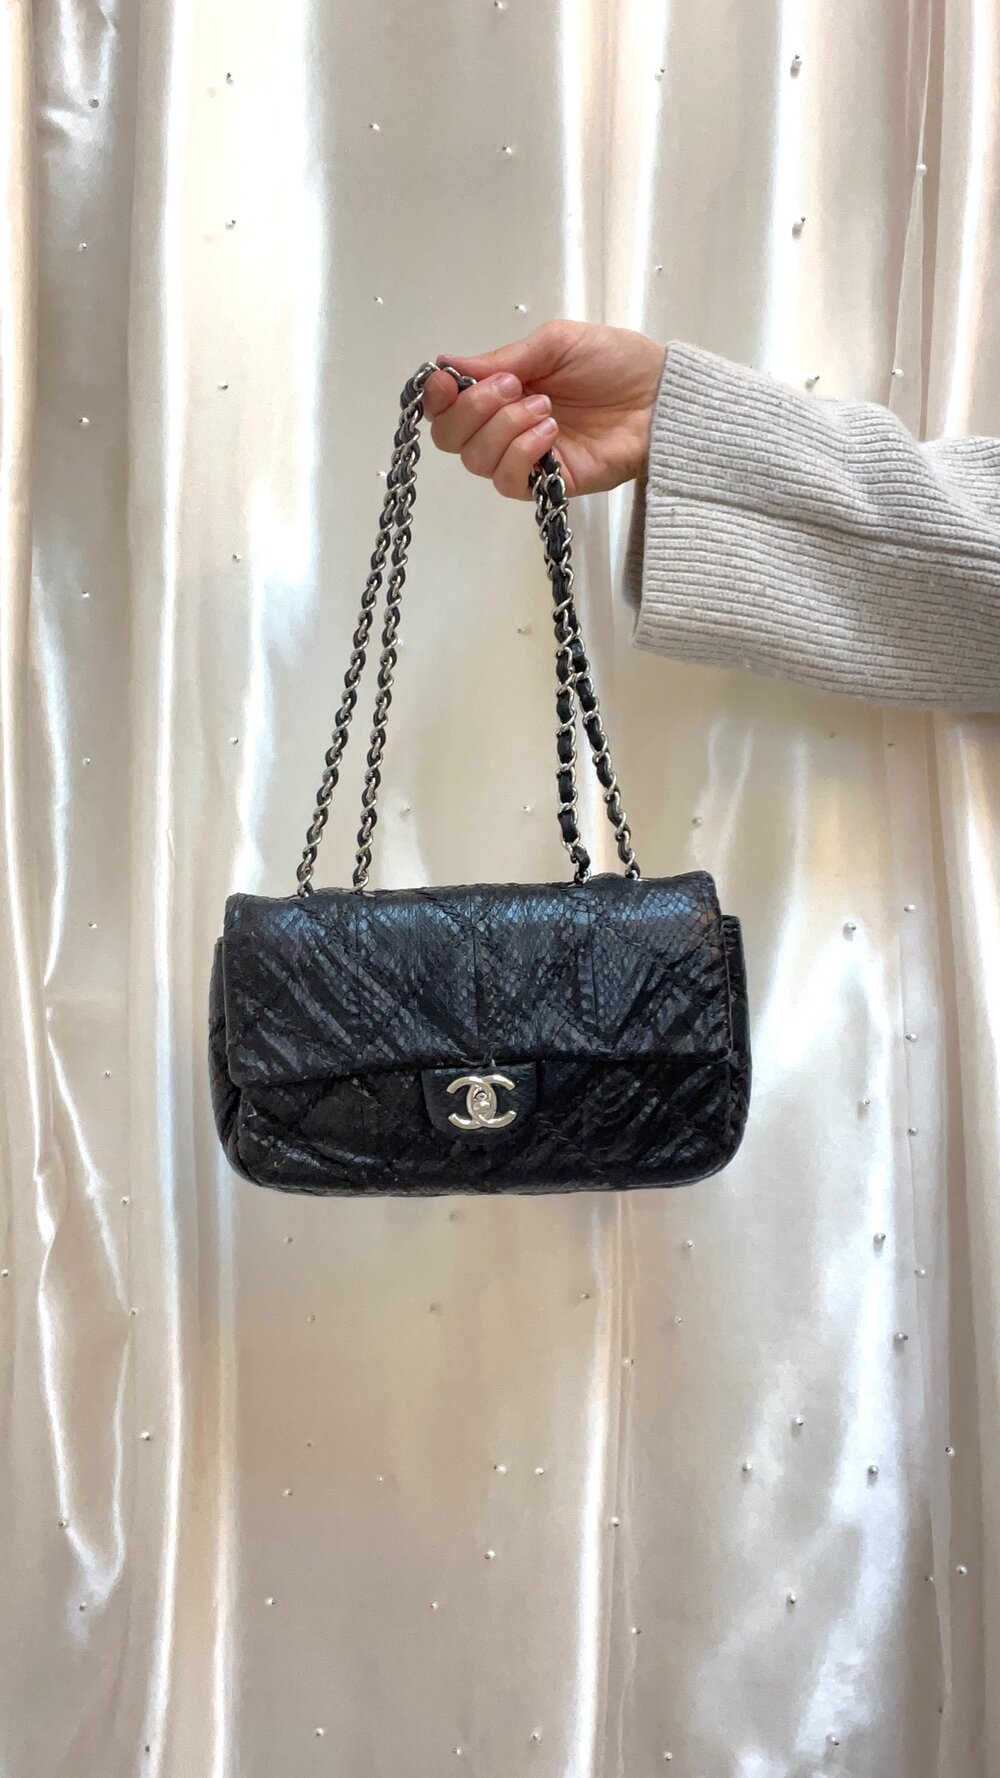 Chanel Quilted Python Classic Single Flap Bag — MISS LULALA